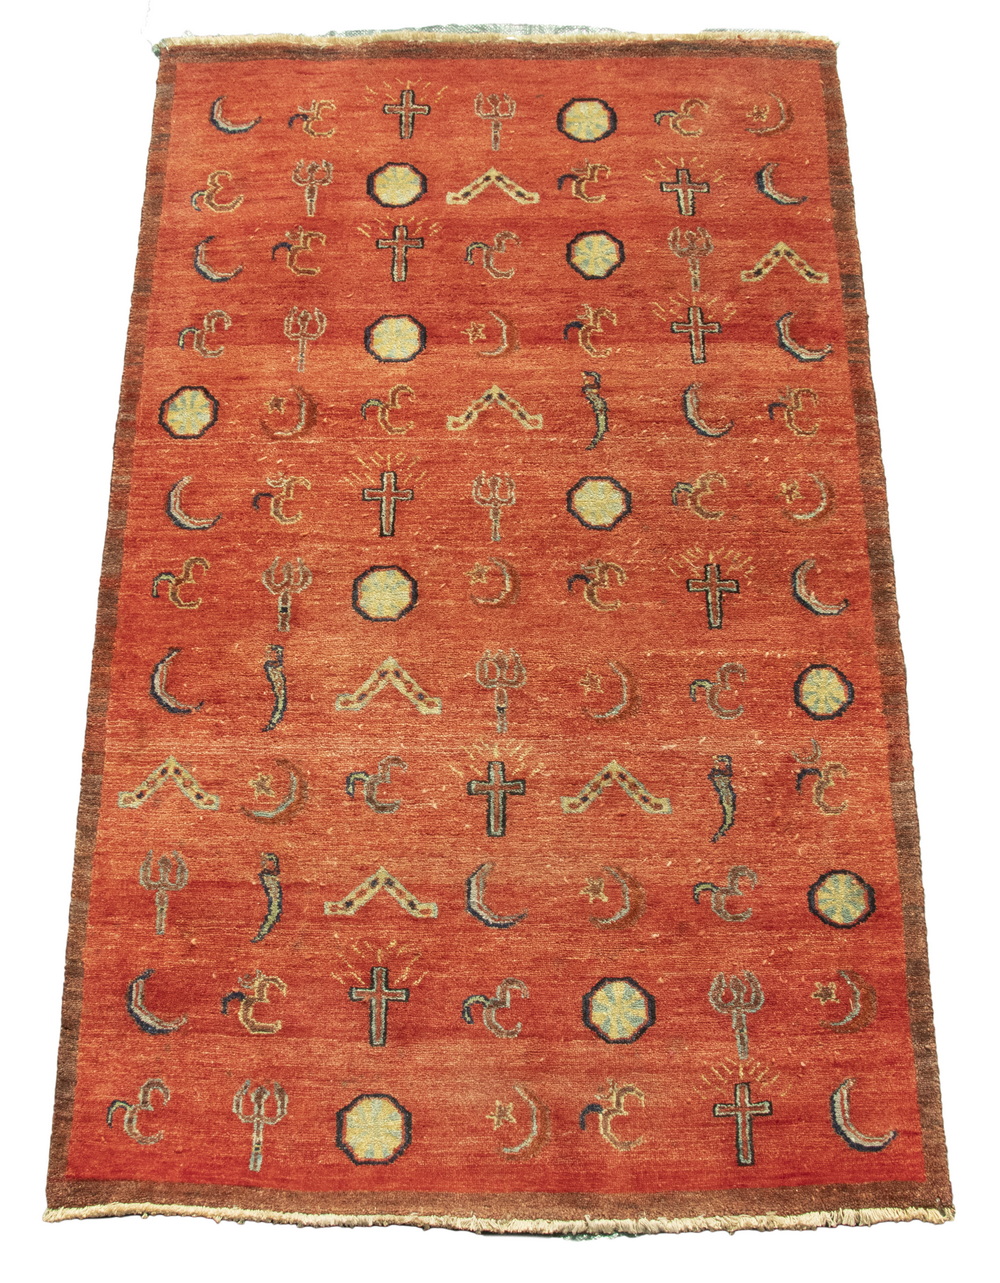 INDIA MADE "PEACE" RUG A rust-red